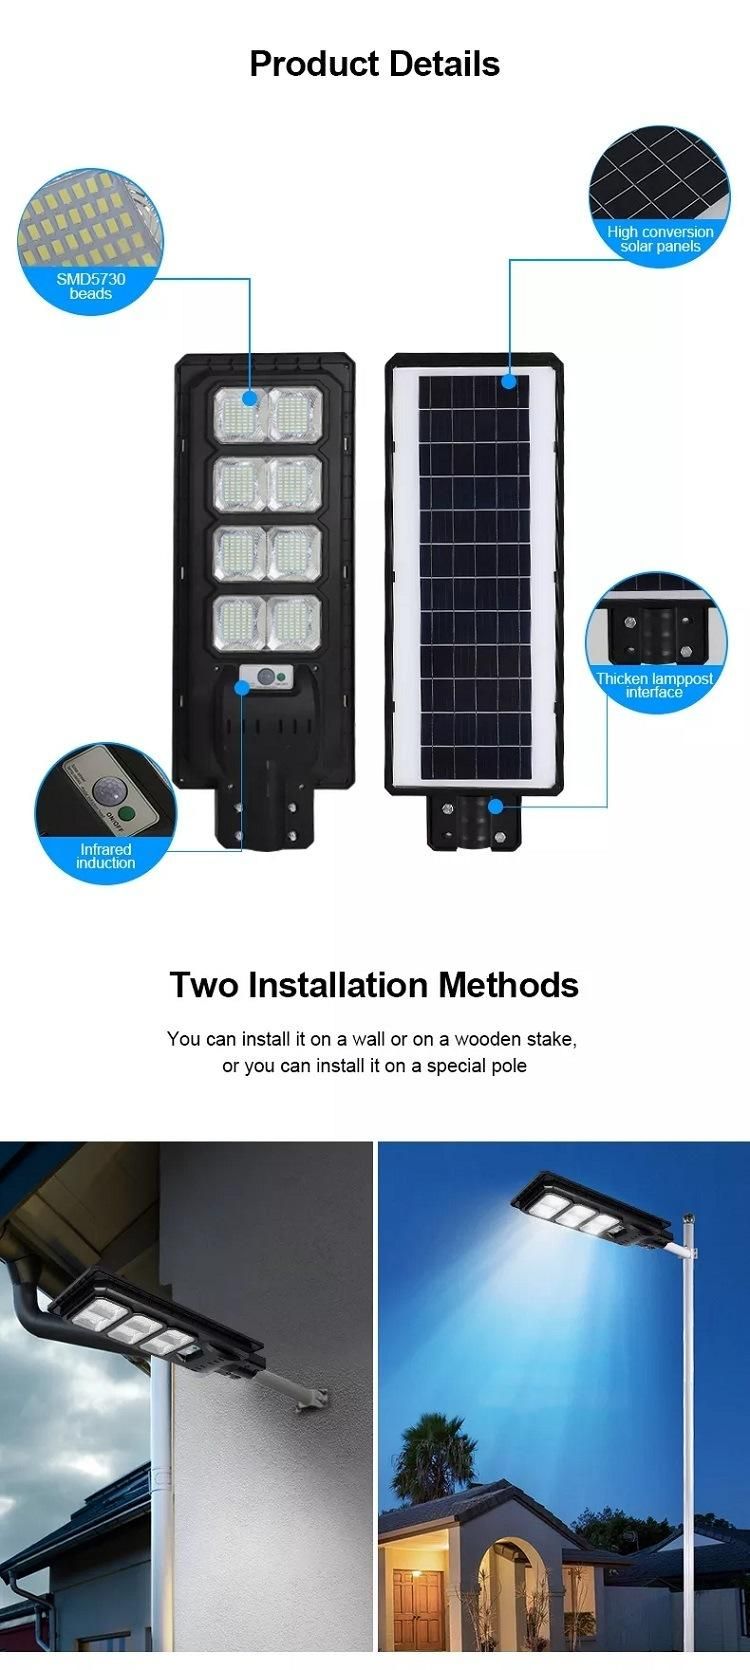 Remote Control High-Performance 50W Hot-Selling Solar Integrated Street Light